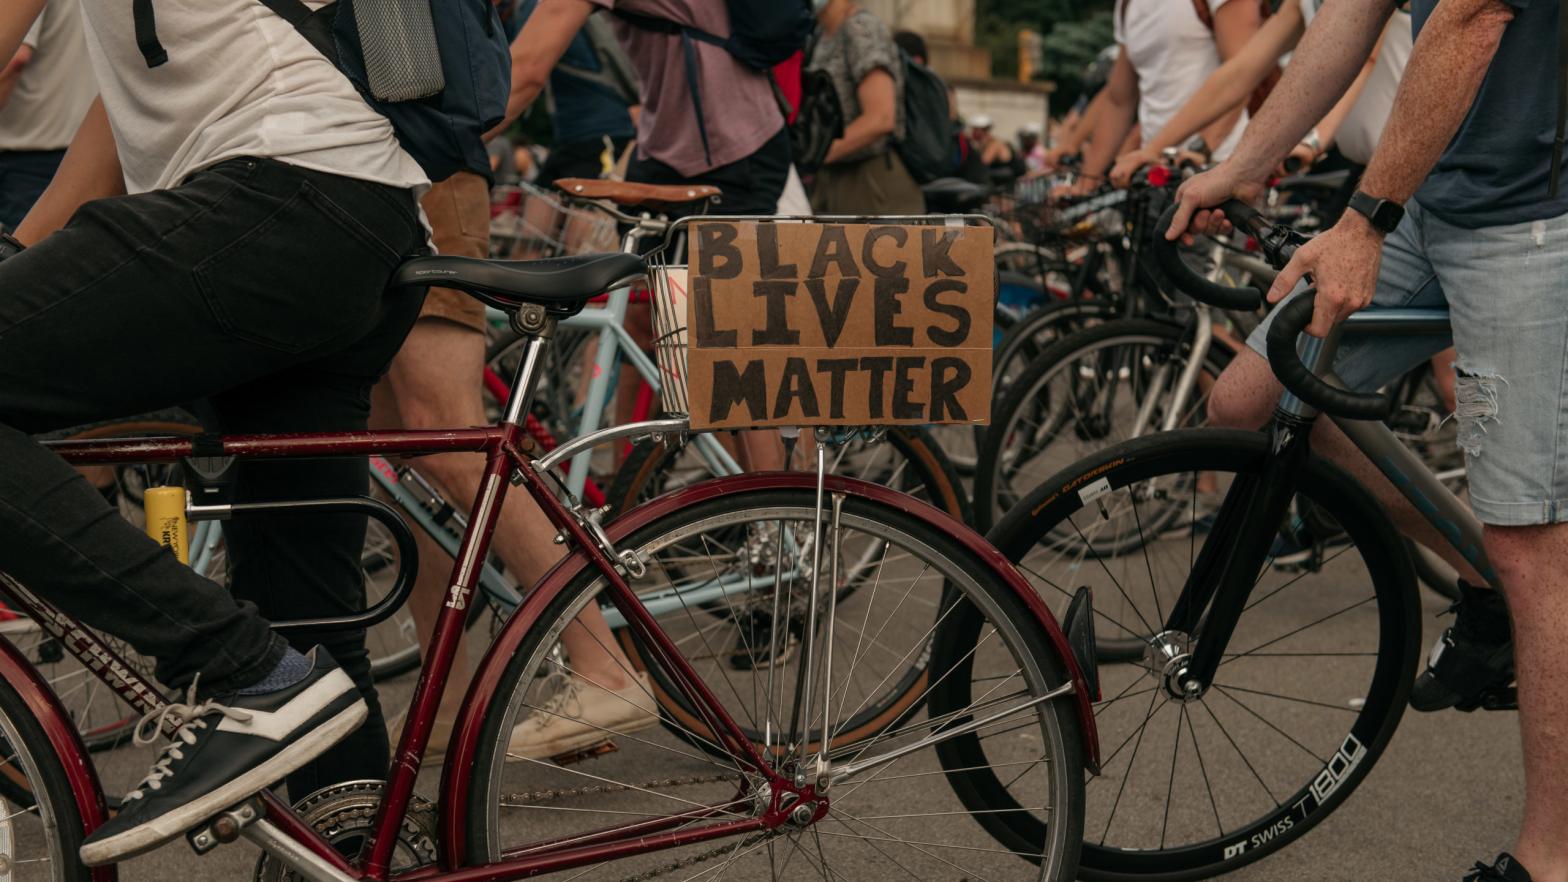 Black Lives Matter protests by bike have become pretty common in New York City. Here, cyclists rode through Brooklyn on June 10, 2020. (Photo: Scott Heins, Getty Images)